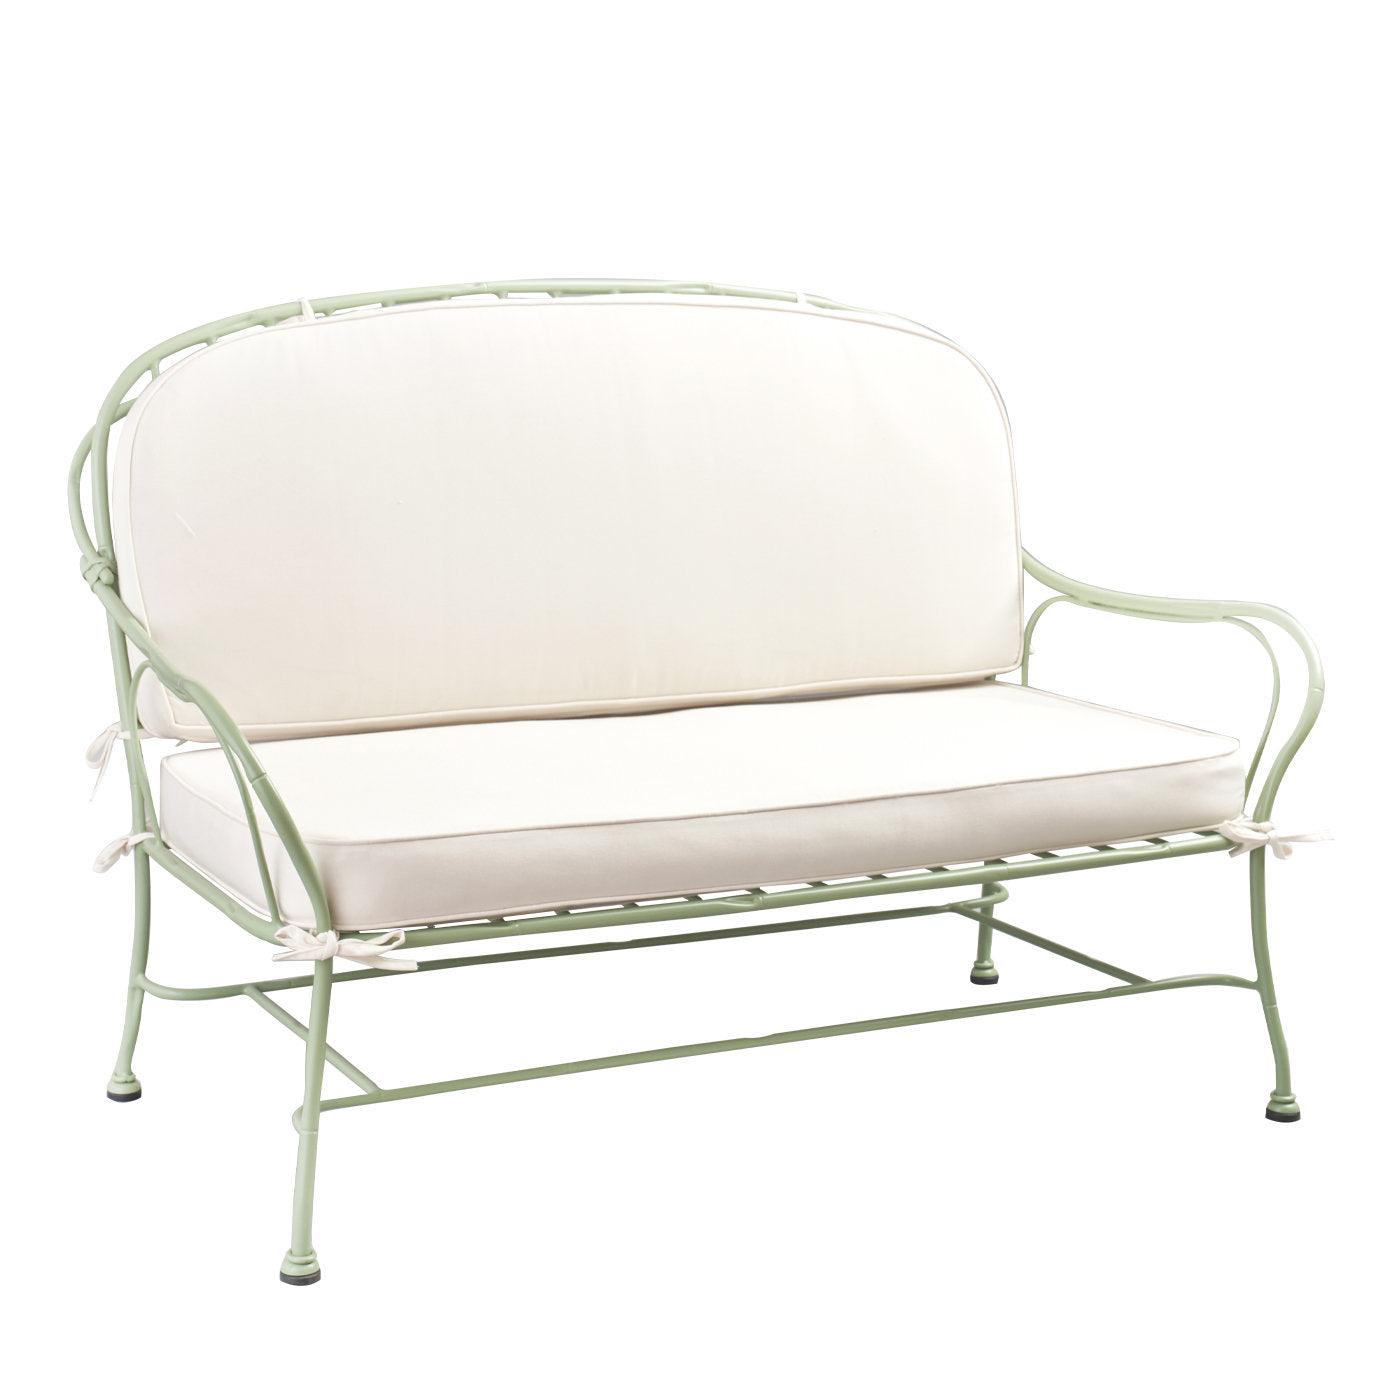 Bamboo Design Curved Green Wrought Sofa in Stainless Steel - Main view